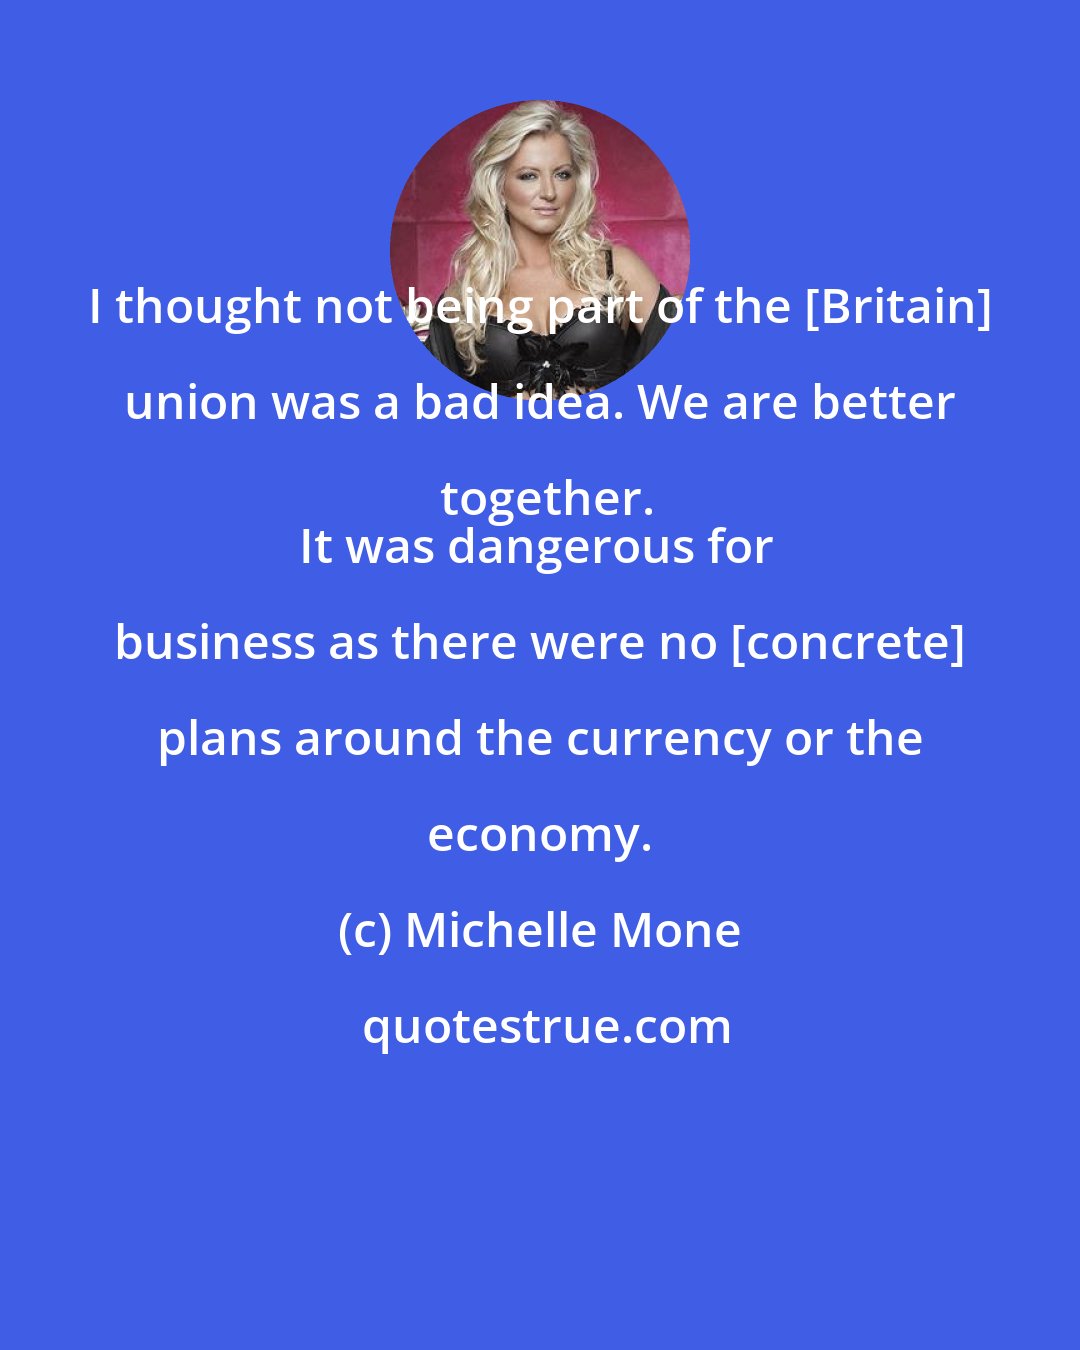 Michelle Mone: I thought not being part of the [Britain] union was a bad idea. We are better together.
It was dangerous for business as there were no [concrete] plans around the currency or the economy.